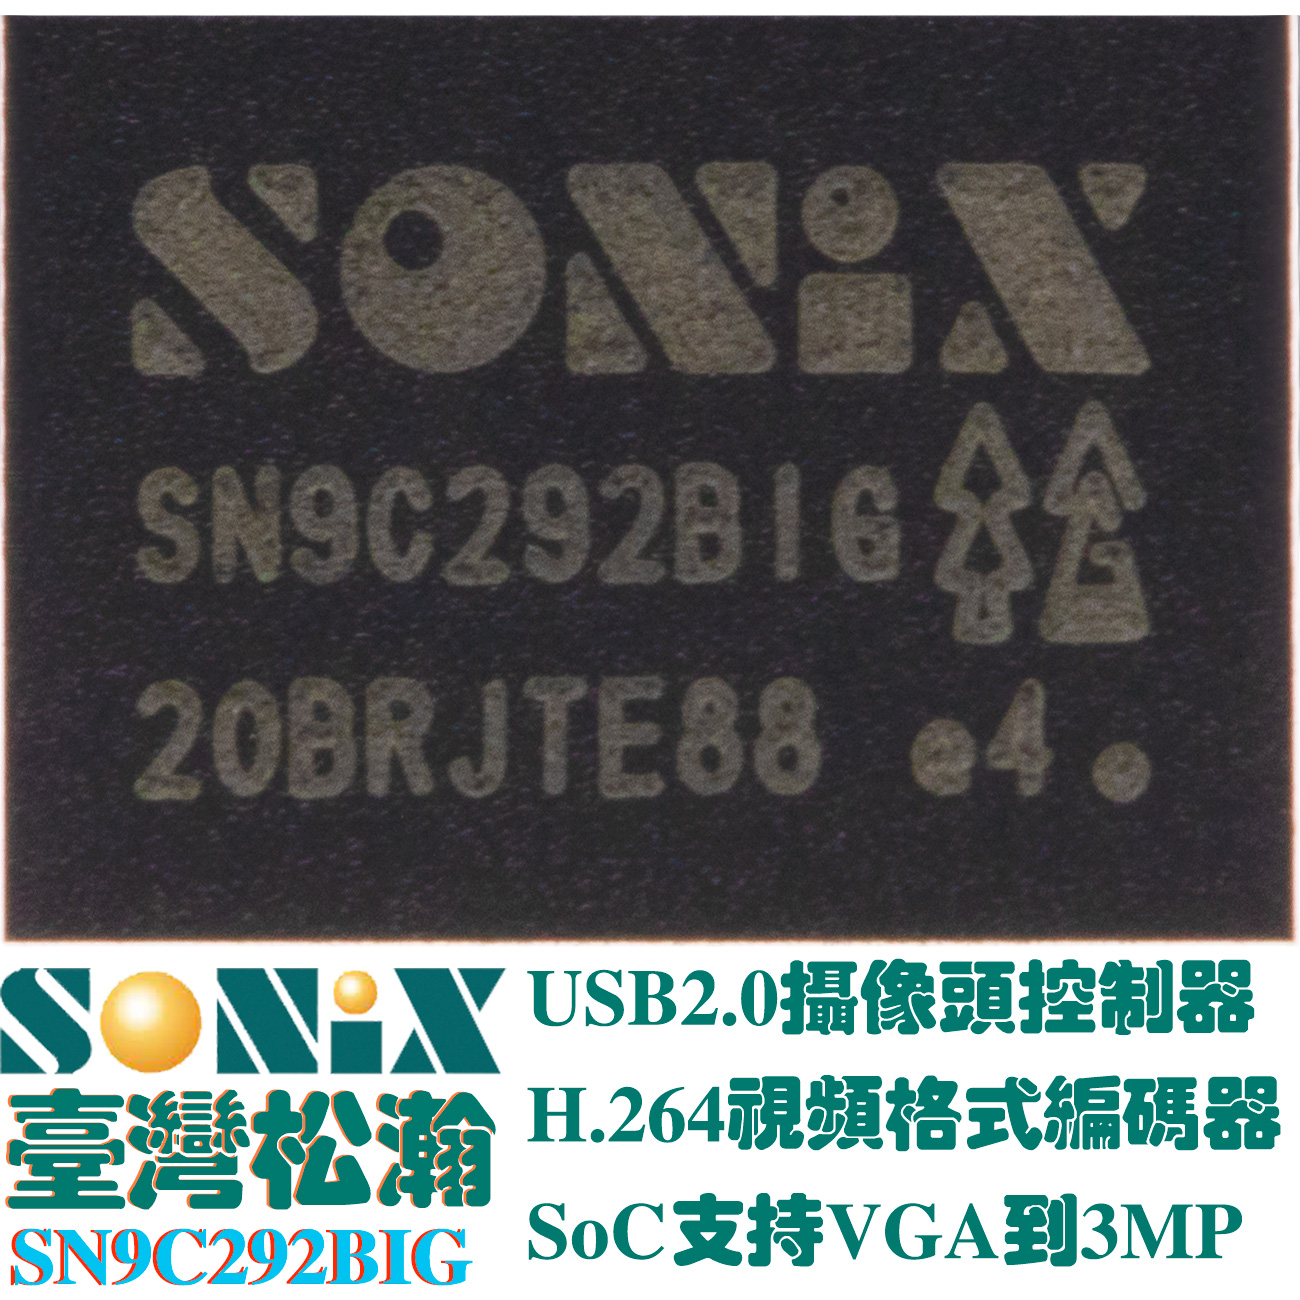 AR0130CS ONSEMI安森美1/3‐inch 1.2 MP CMOS Digital Image Sensor for security camera, SONIX SN9C292Big  USB 2.0 High-Speed (HS) compatible PC Camera controller,support VGA to 3MP cmos sensor,H.264, built-in 3A (AE / AWB / AF)